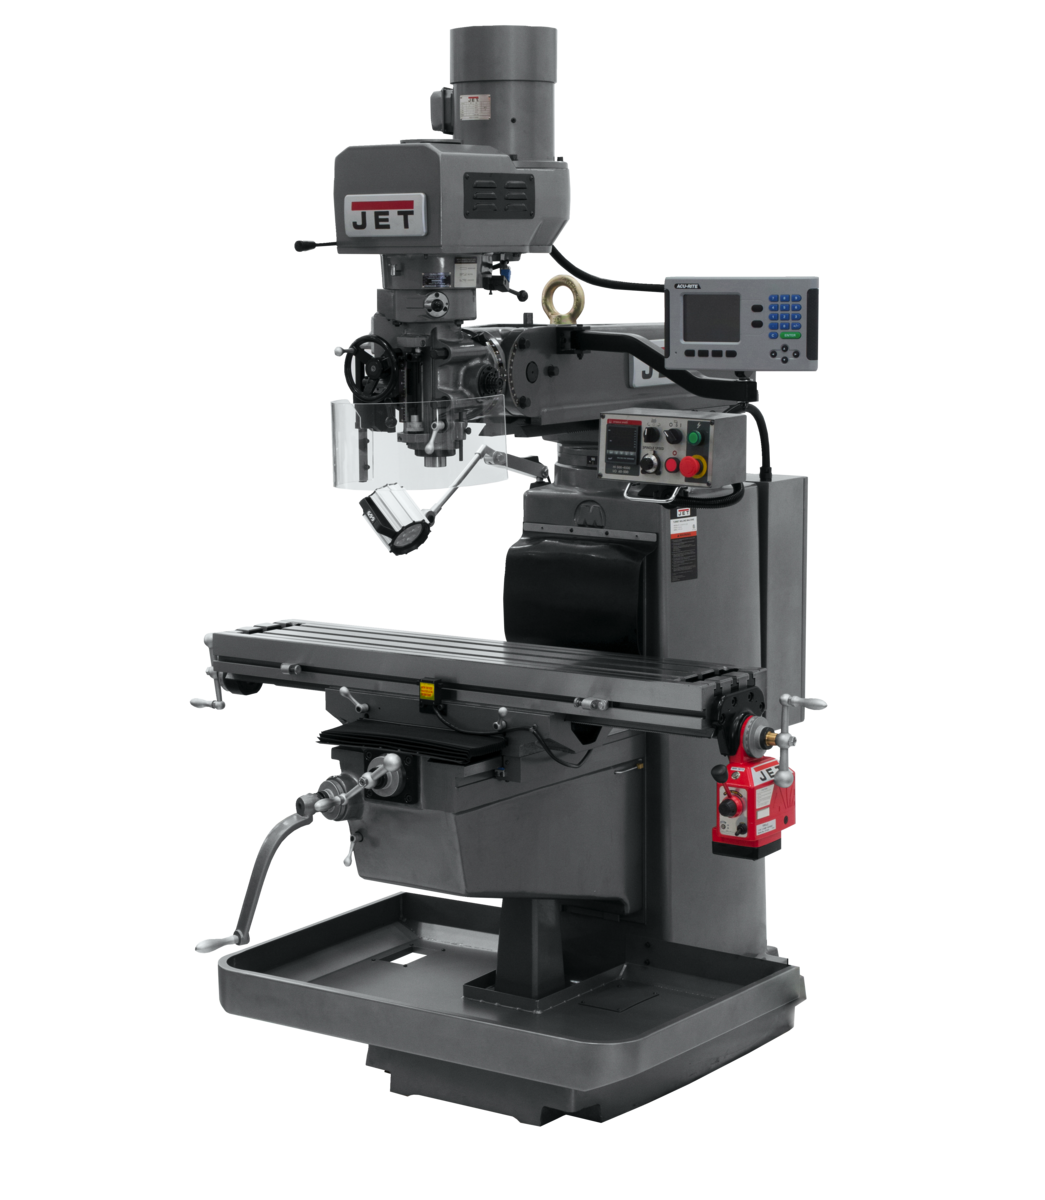 JTM-1050EVS2/230 Mill With 3-Axis Acu-Rite 203 DRO (Knee) With X-Axis Powerfeed